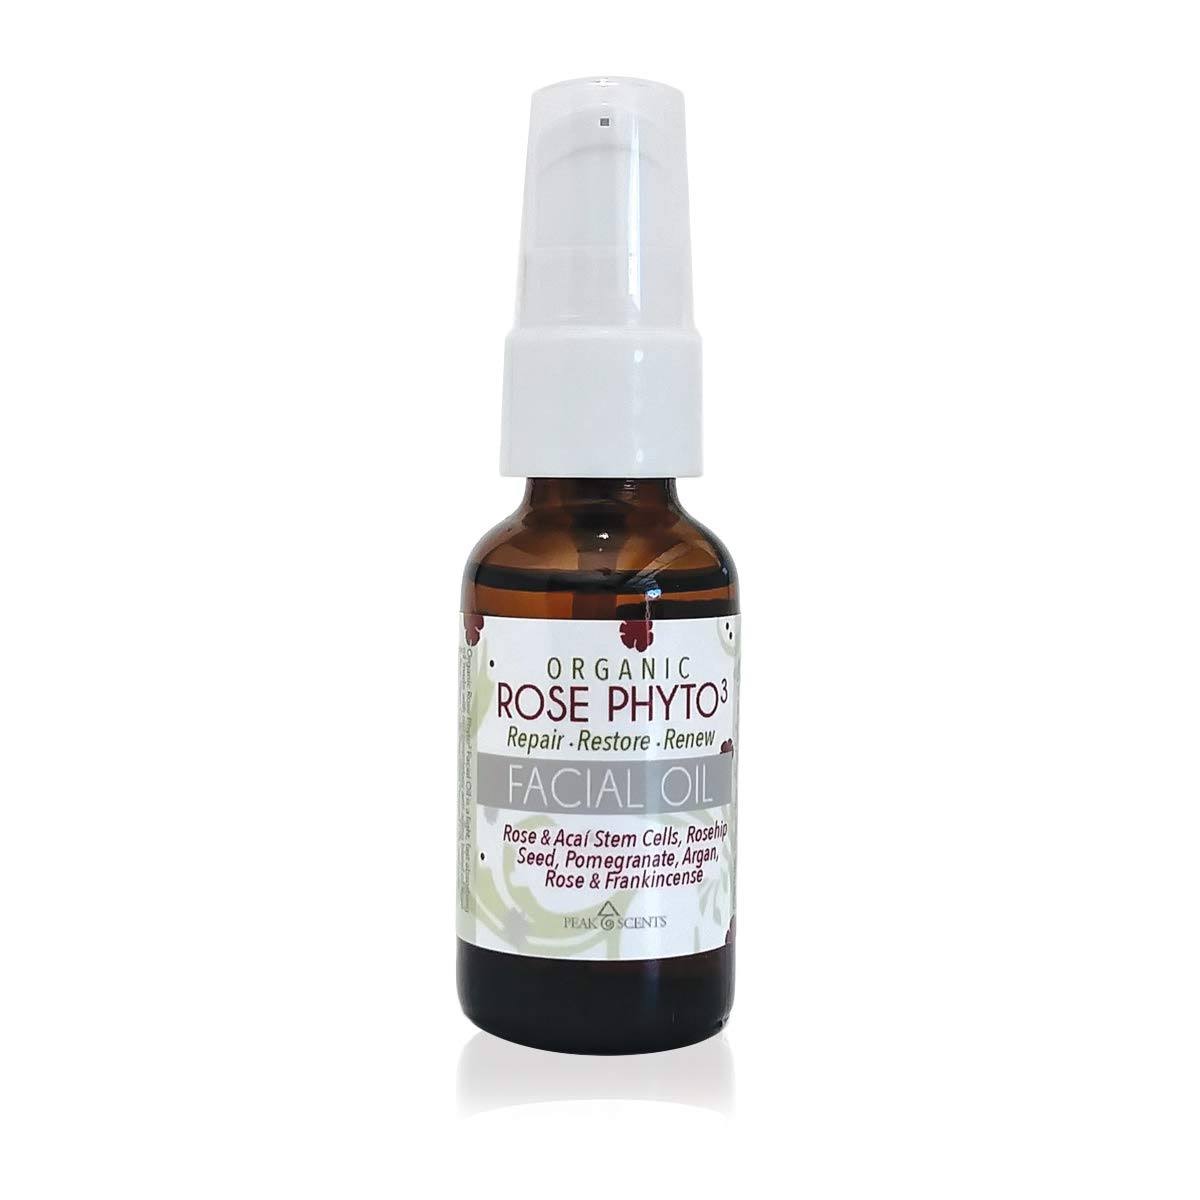 Organic Rose Phyto3 Facial Oil - 30ml Amber Glass -Hydrating Face Oil, Fast Absorbing Great for Sensitive Skin - Cold Pressed Organic Oils